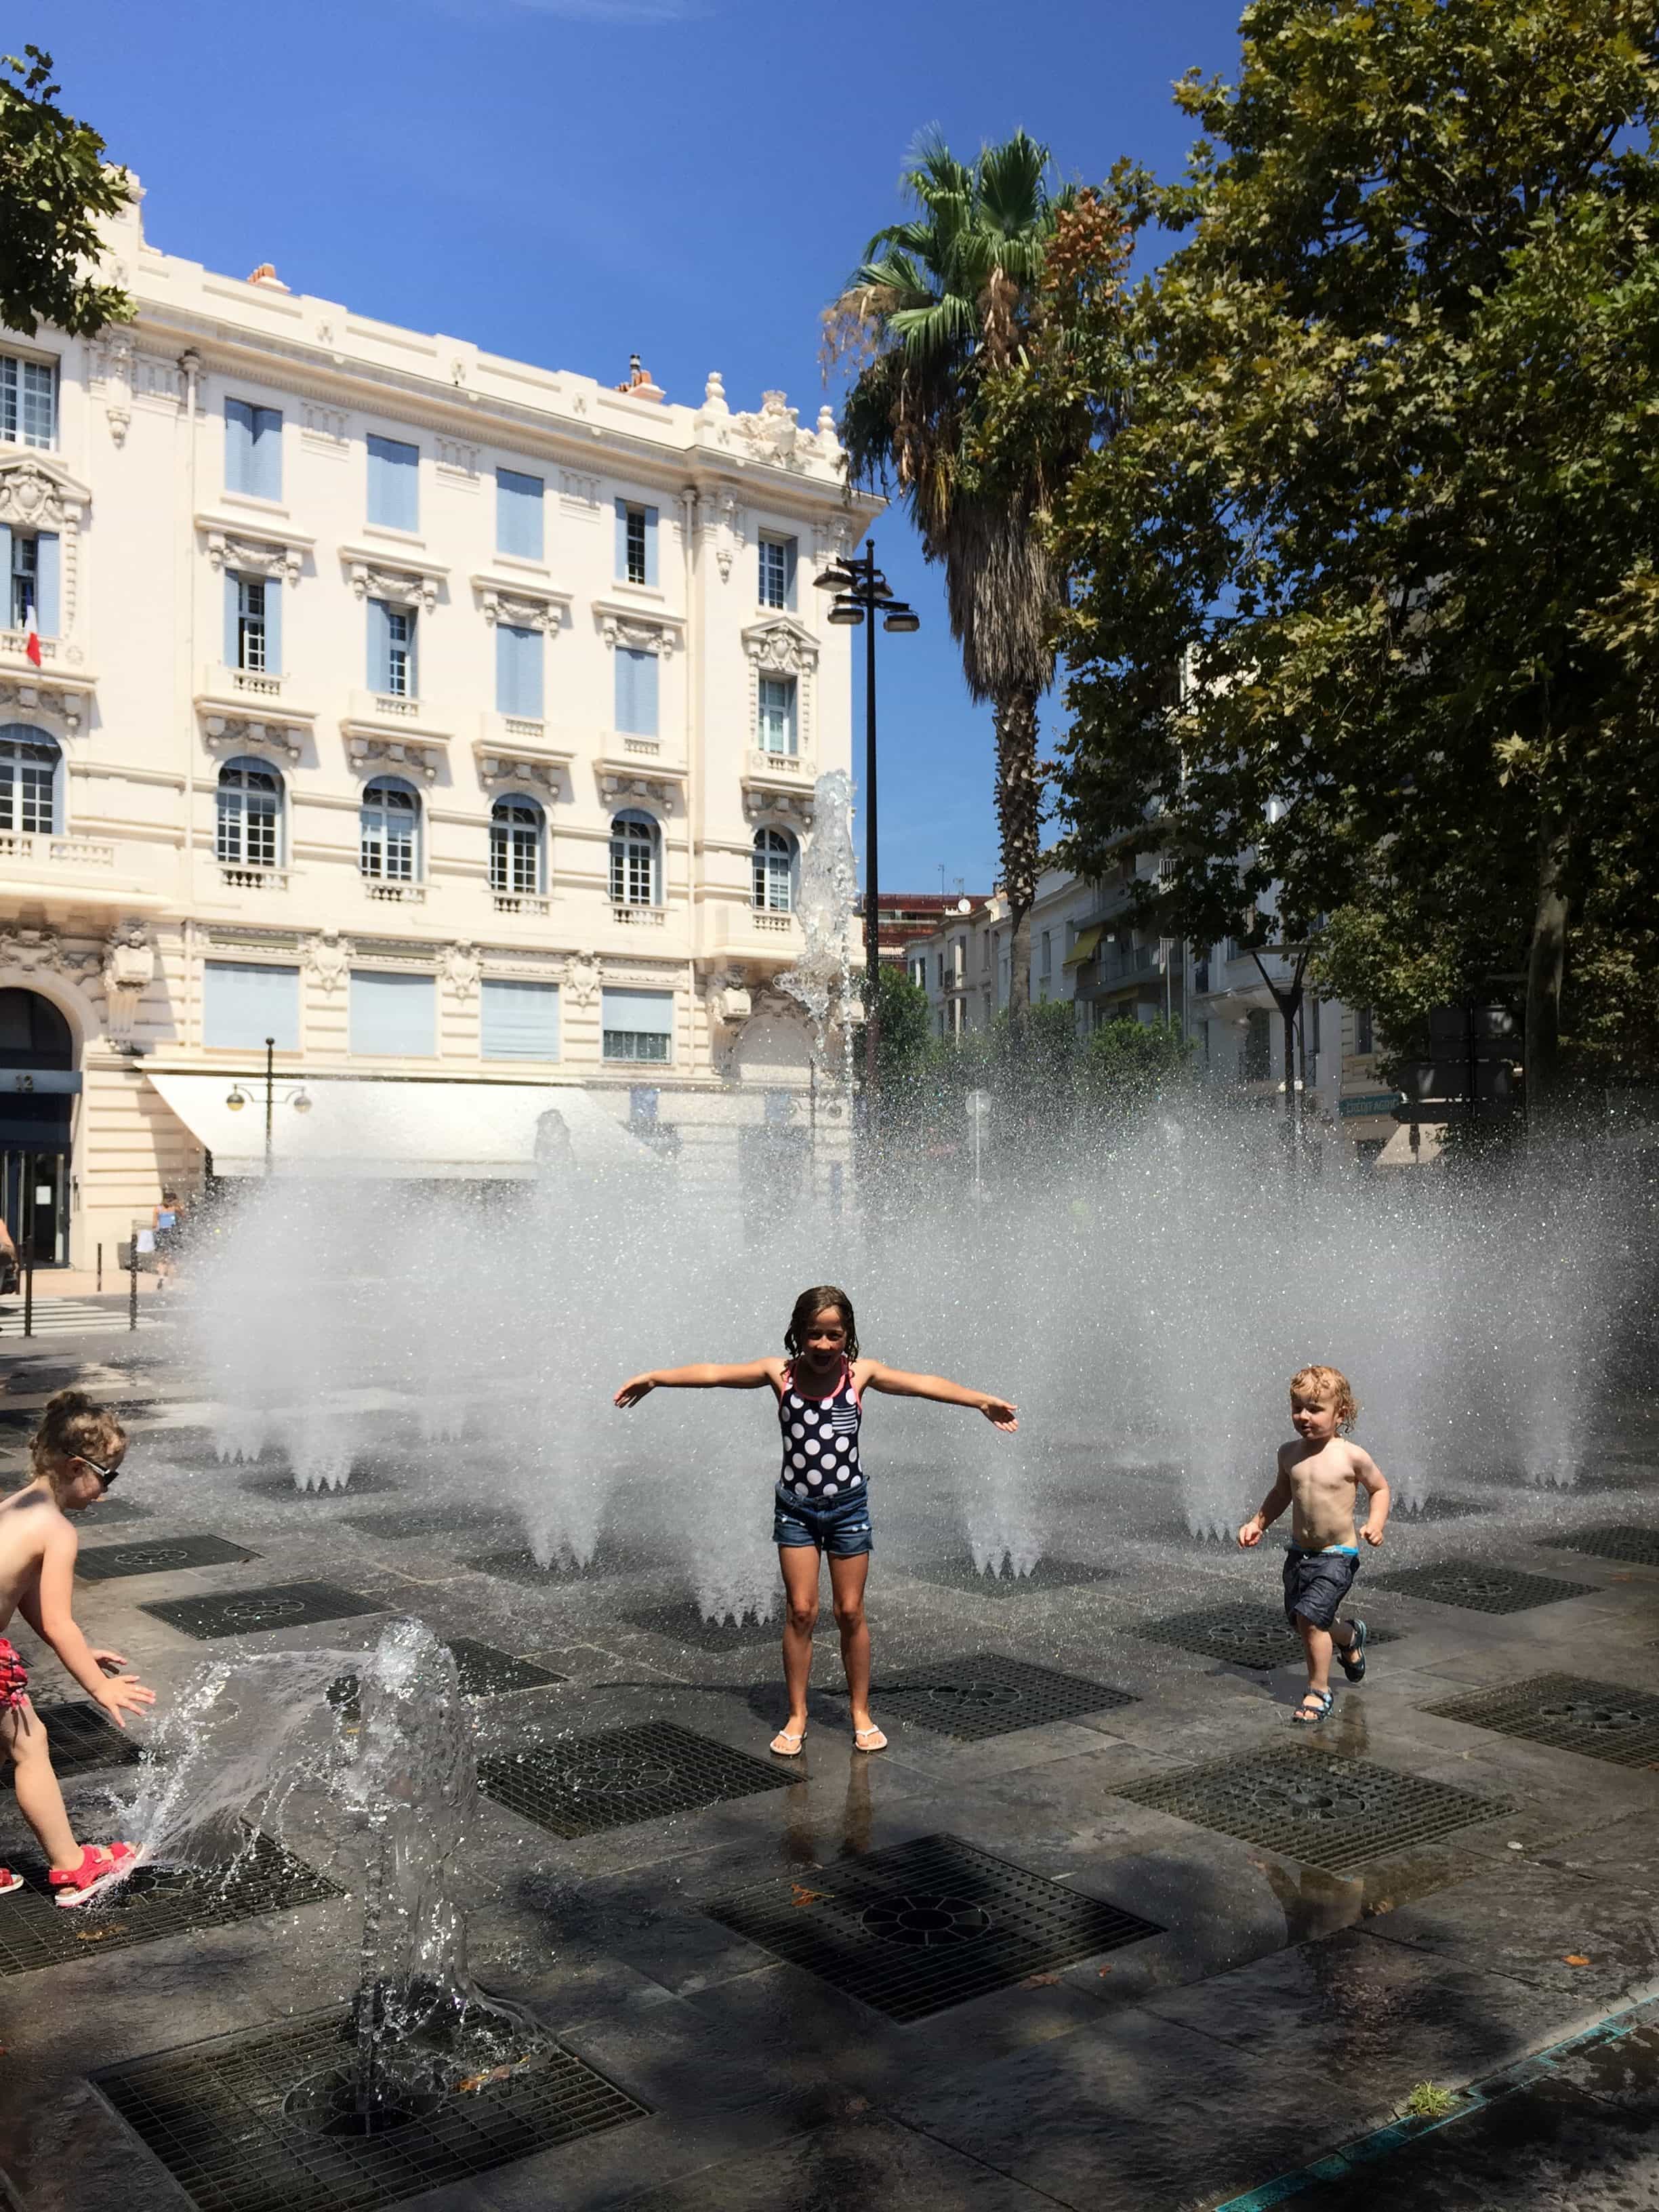 Cooling off at the inground fountains in Antibes